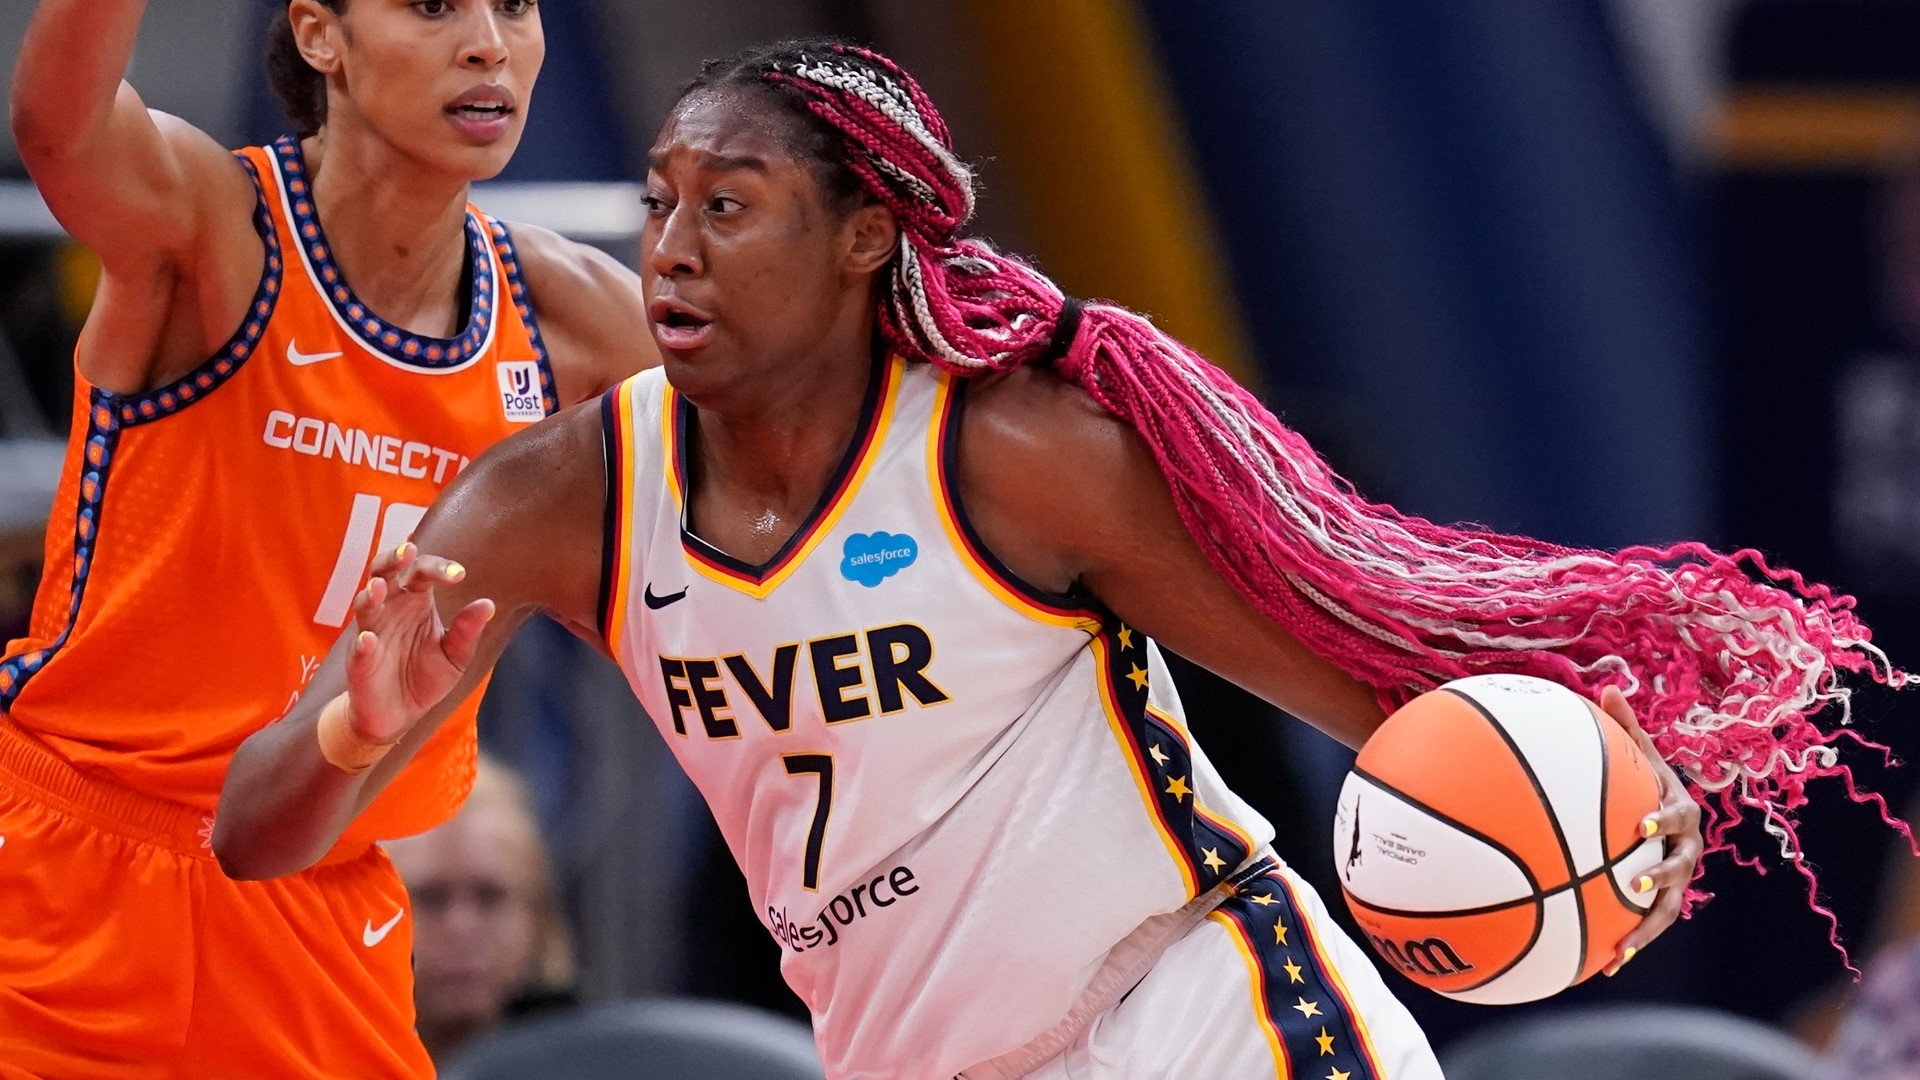 This year the Indiana Fever will have 36 of their 40 games broadcast on national television. Their season begins on May 14 against Connecticut.